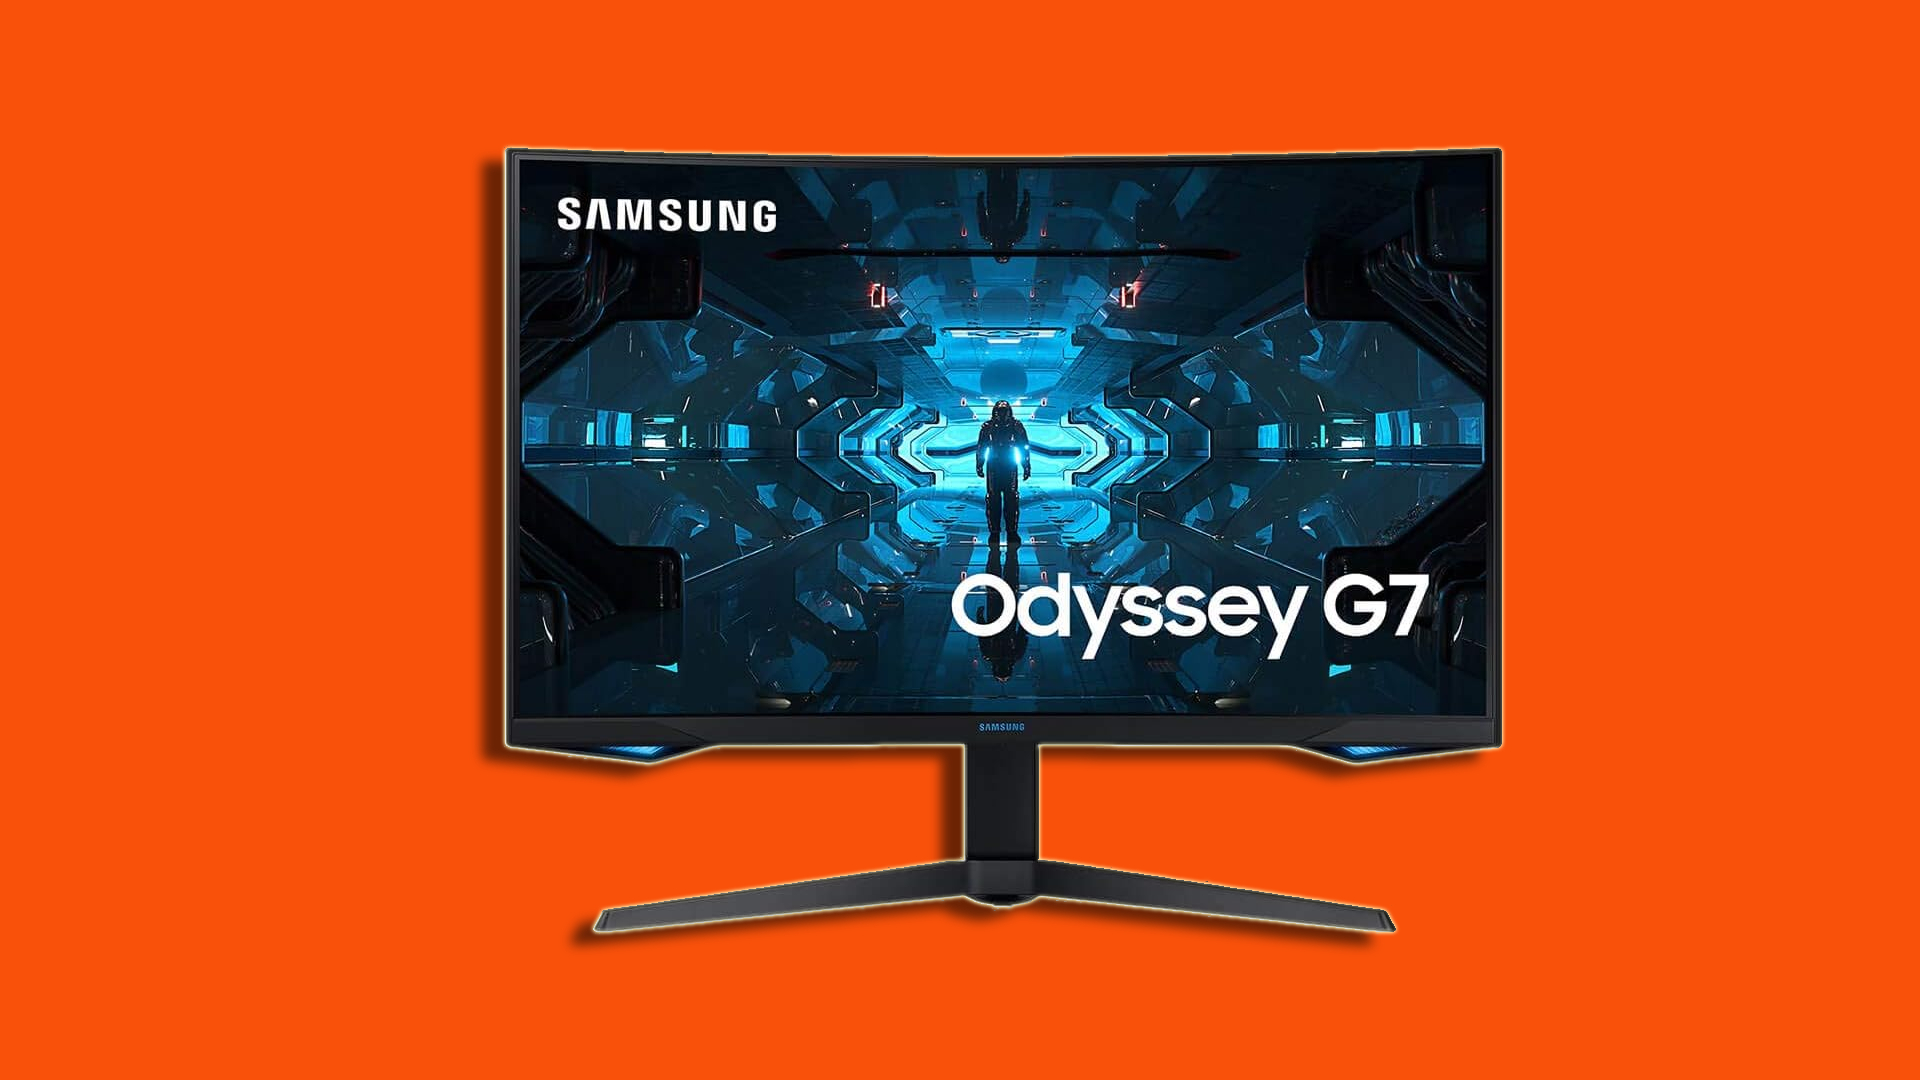 Samsung Odyssey G7 1440p 240hz Curved Gaming Monitor - Monitors